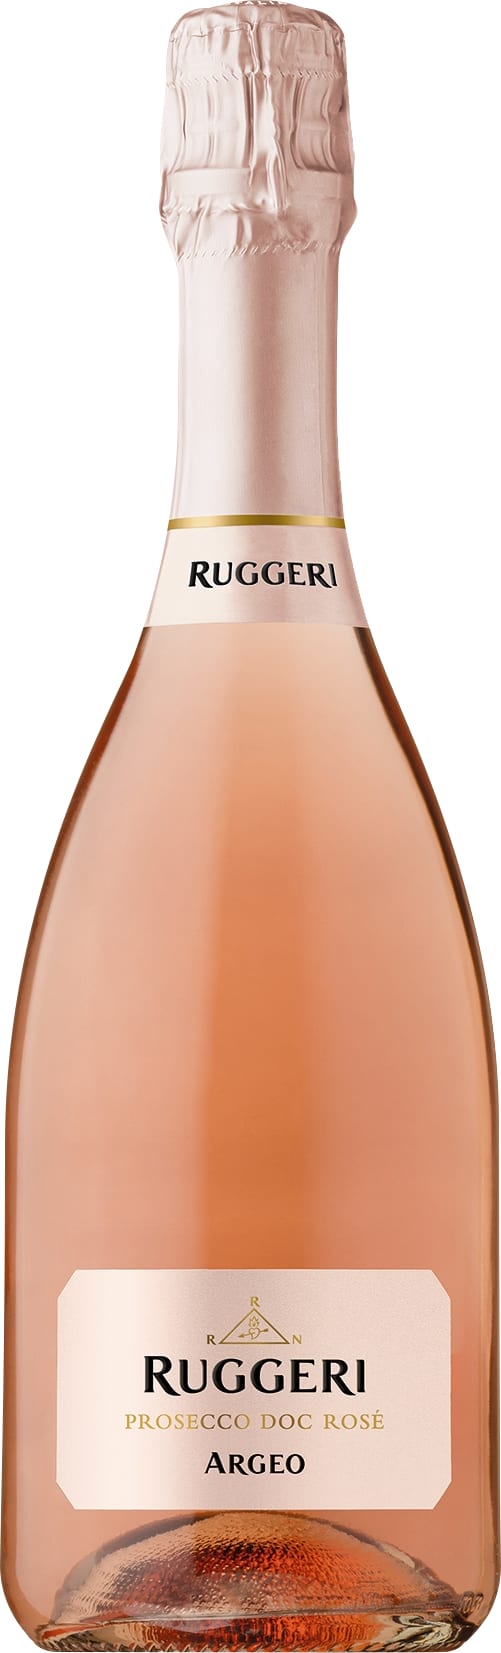 Ruggeri Prosecco Rose Vintage Brut Argeo 2022 20cl - Buy Ruggeri Wines from GREAT WINES DIRECT wine shop